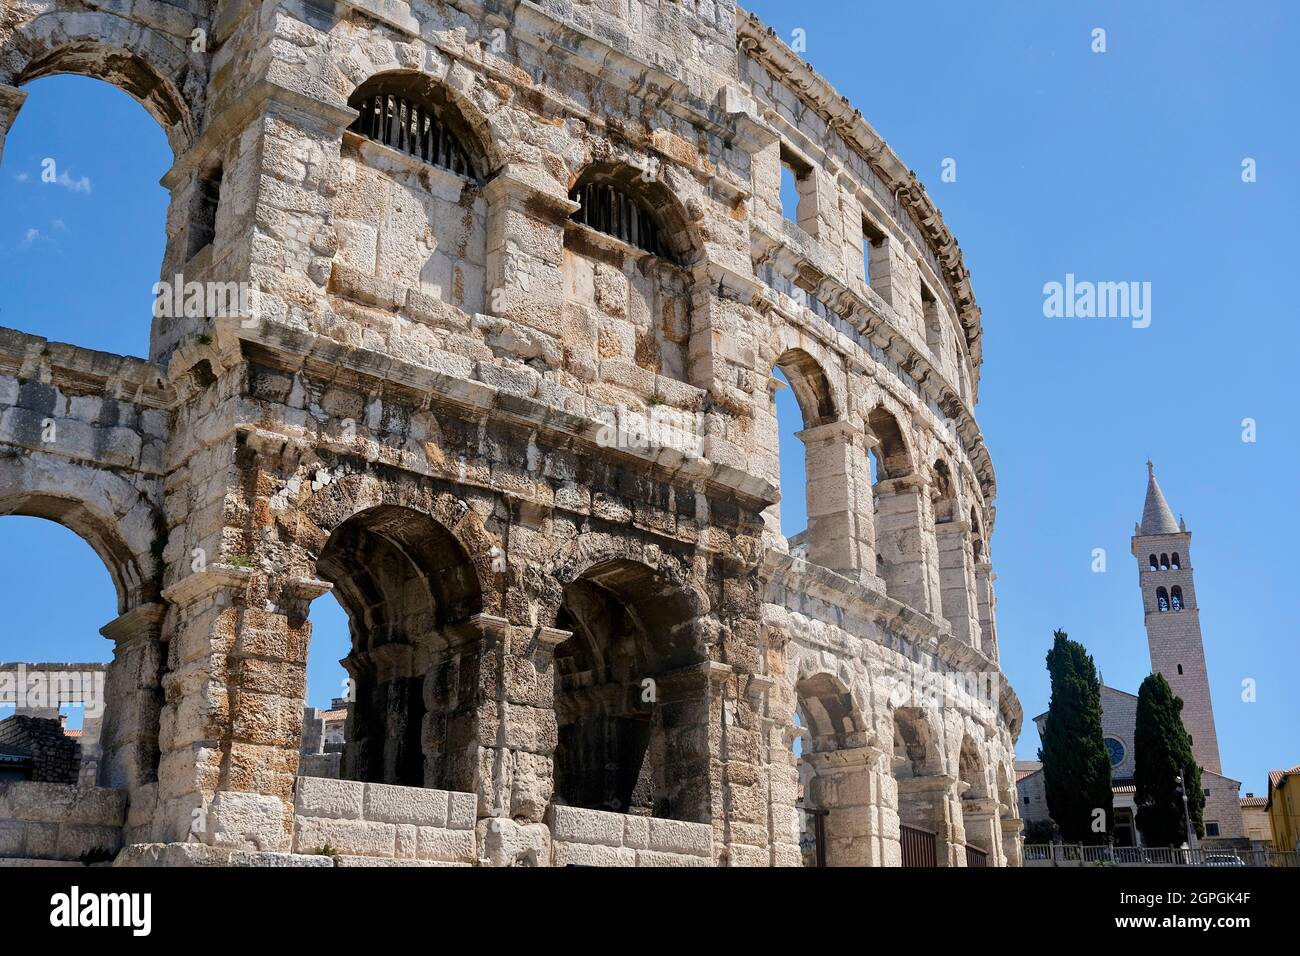 Croatia, Istria, Adriatic coast, Pula, the Roman amphitheater or Coliseum of Pula, built in the 1st century, during the reign of the emperor Augustus and the bell tower of Saint-Antoine chuch Stock Photo